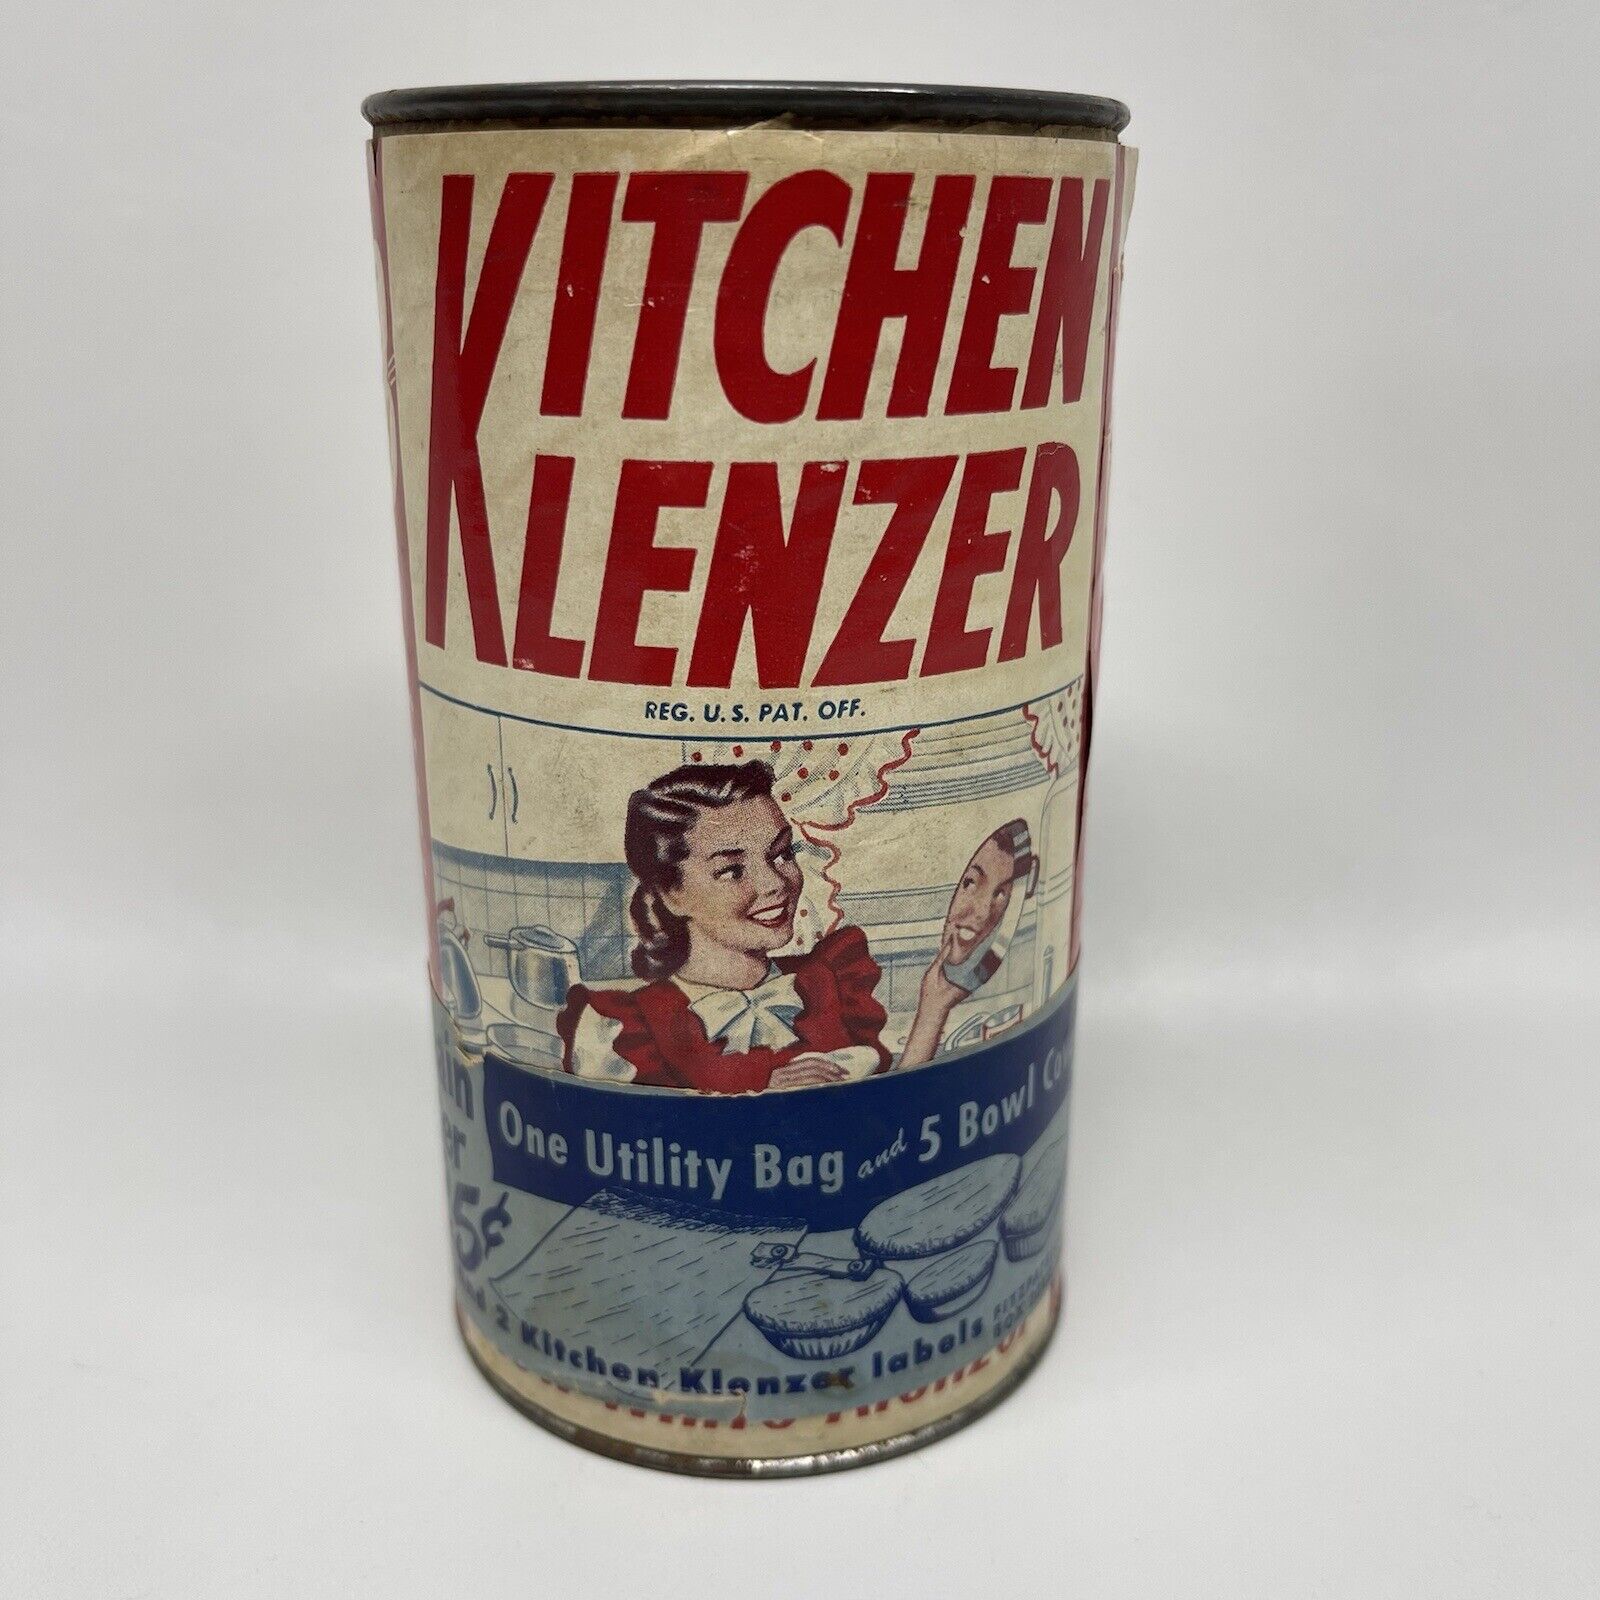 Vtg Kitchen Klenzer Can Household Advertising Paper Label Coupon Unopened PROP